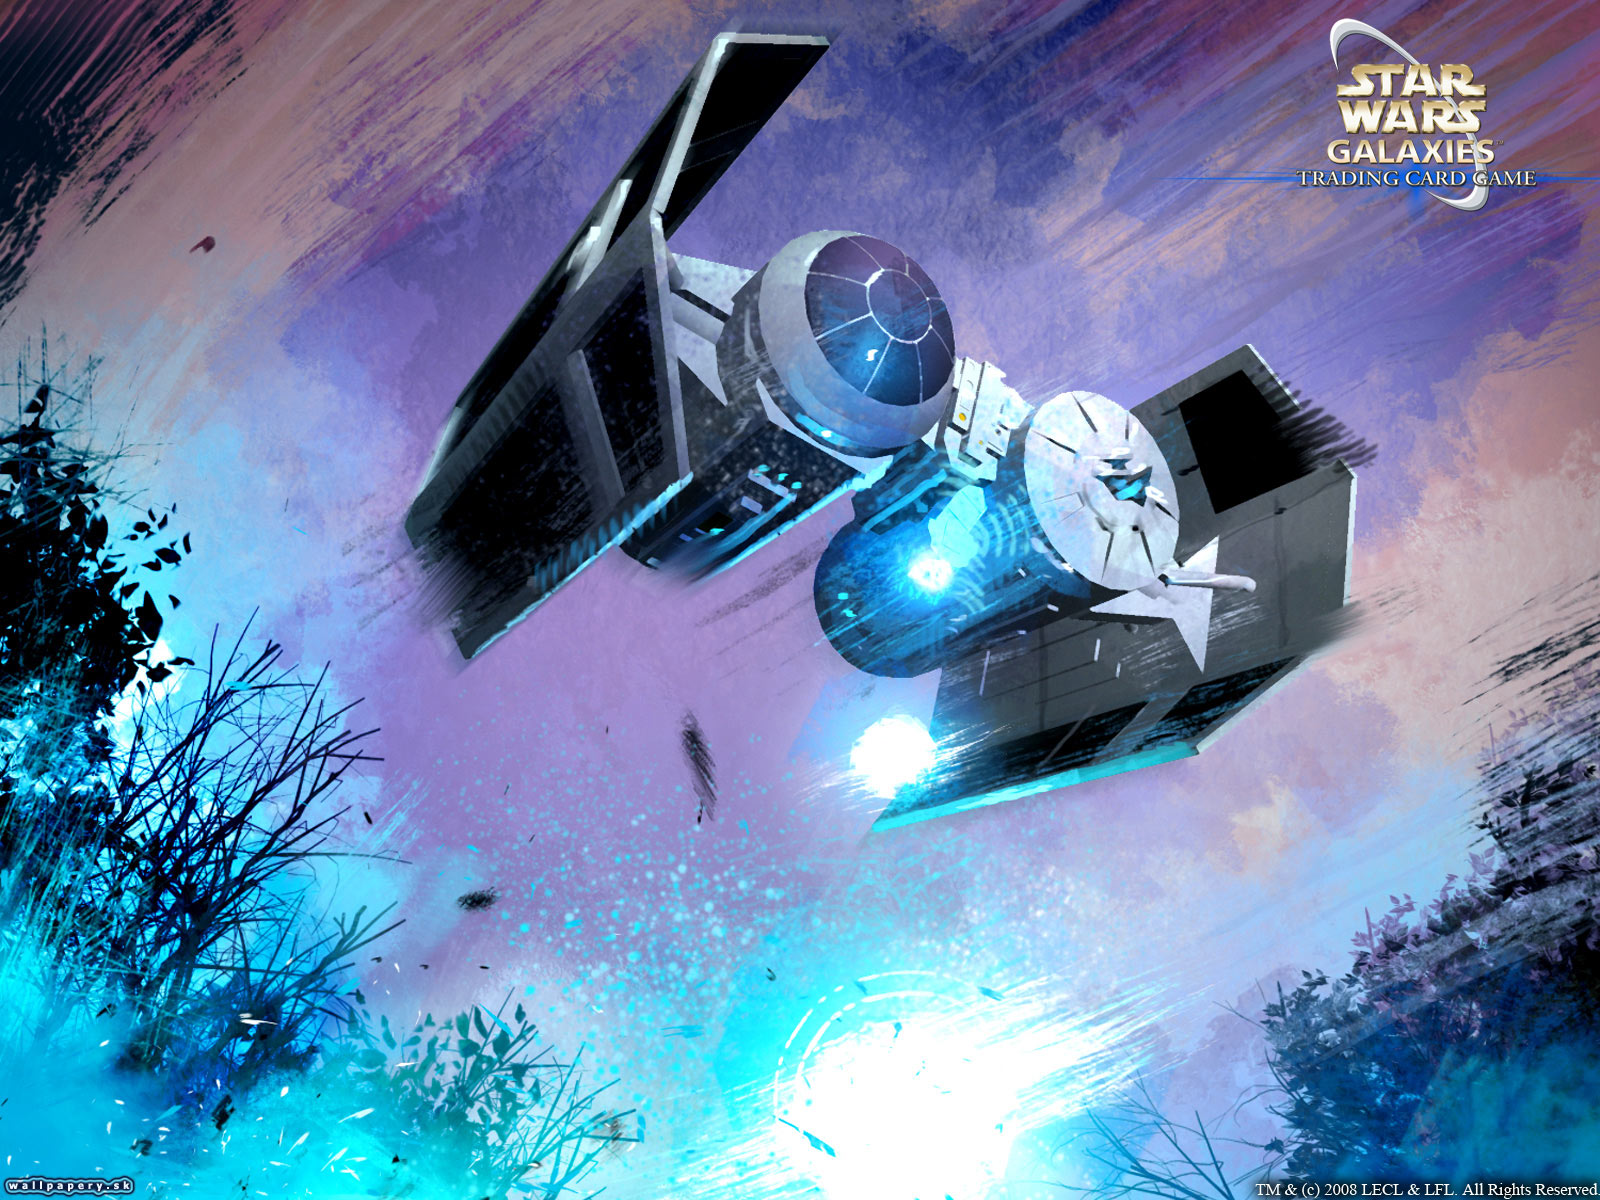 Star Wars Galaxies - Trading Card Game: Champions of the Force - wallpaper 24